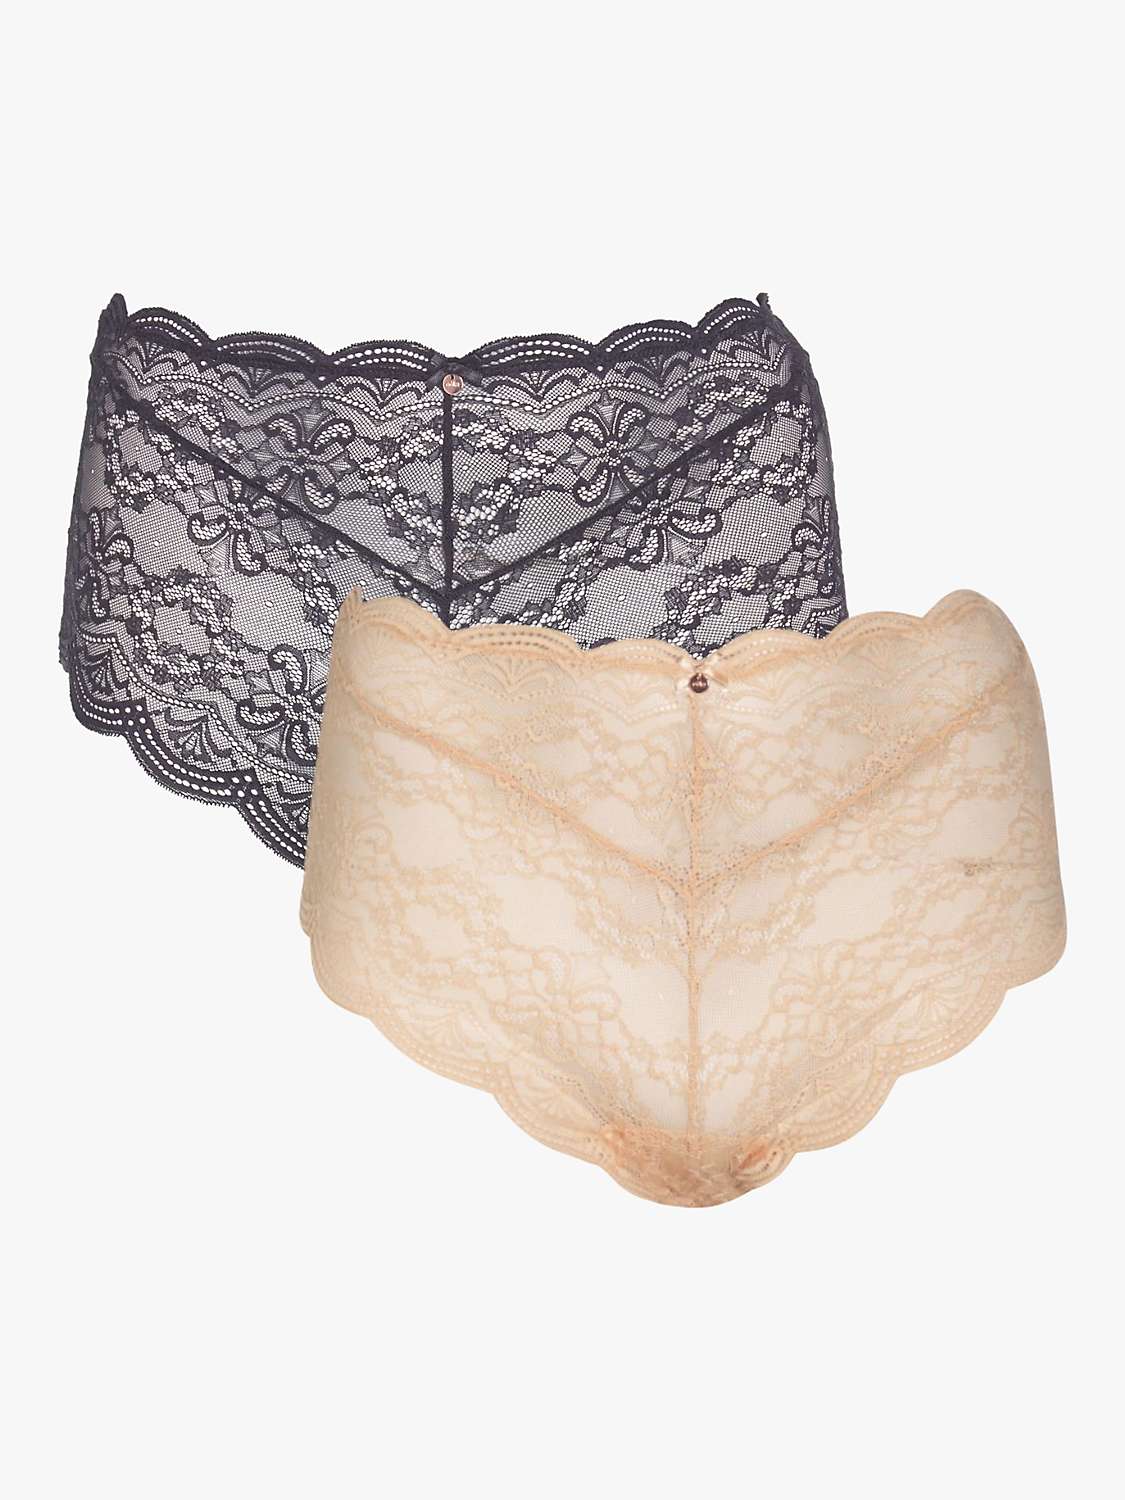 Buy Oola Lingerie Scallop Lace Short Knickers, Pack of 2, Black/Latte Online at johnlewis.com